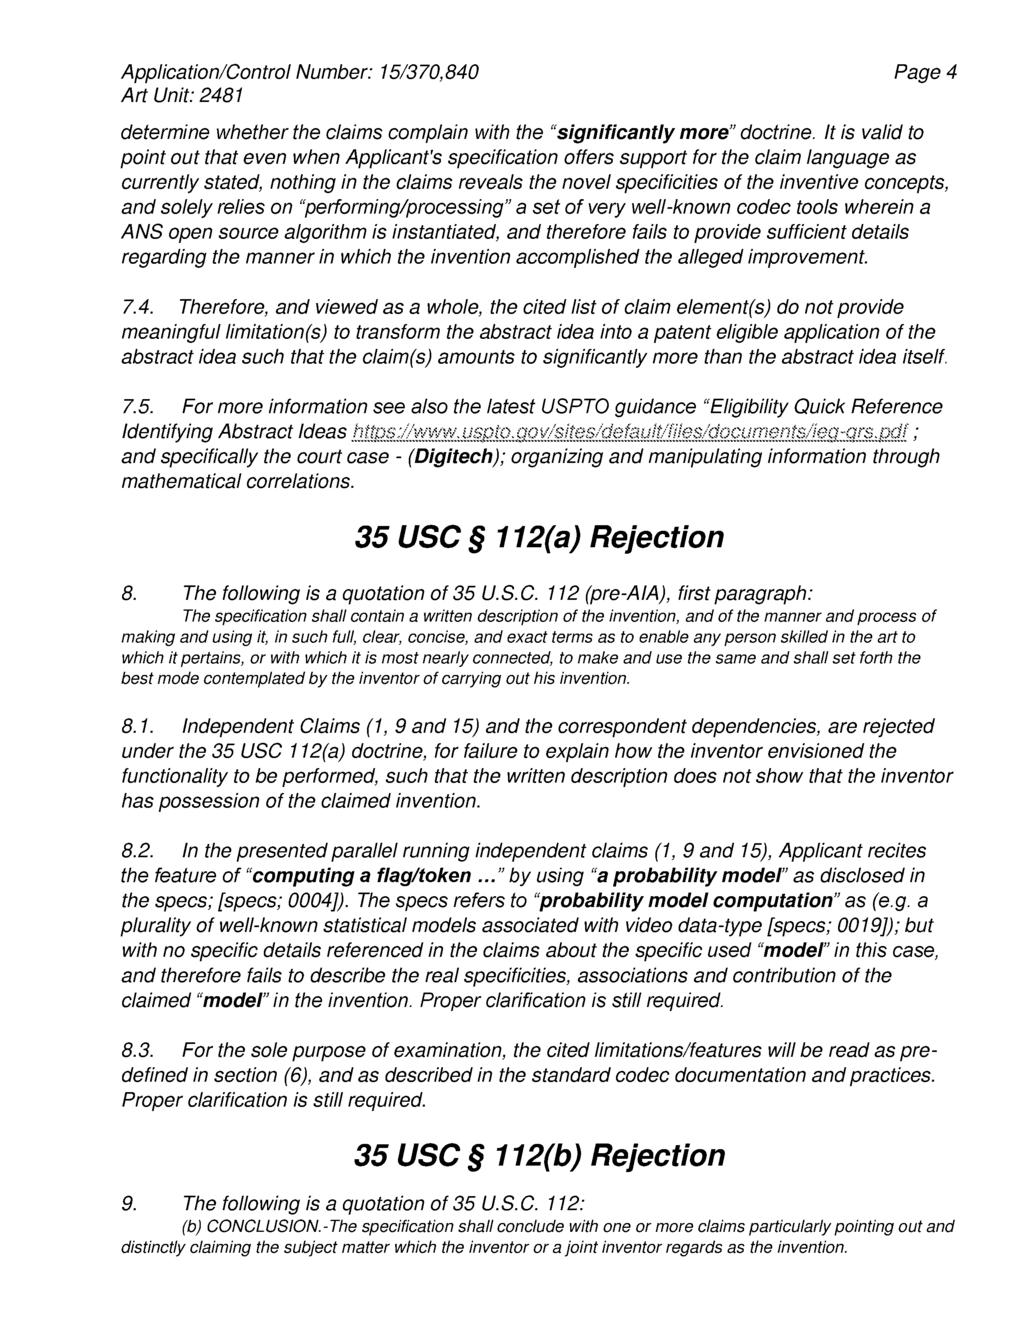 Page4 determine whether the claims complain with the "significantly more" doctrine.